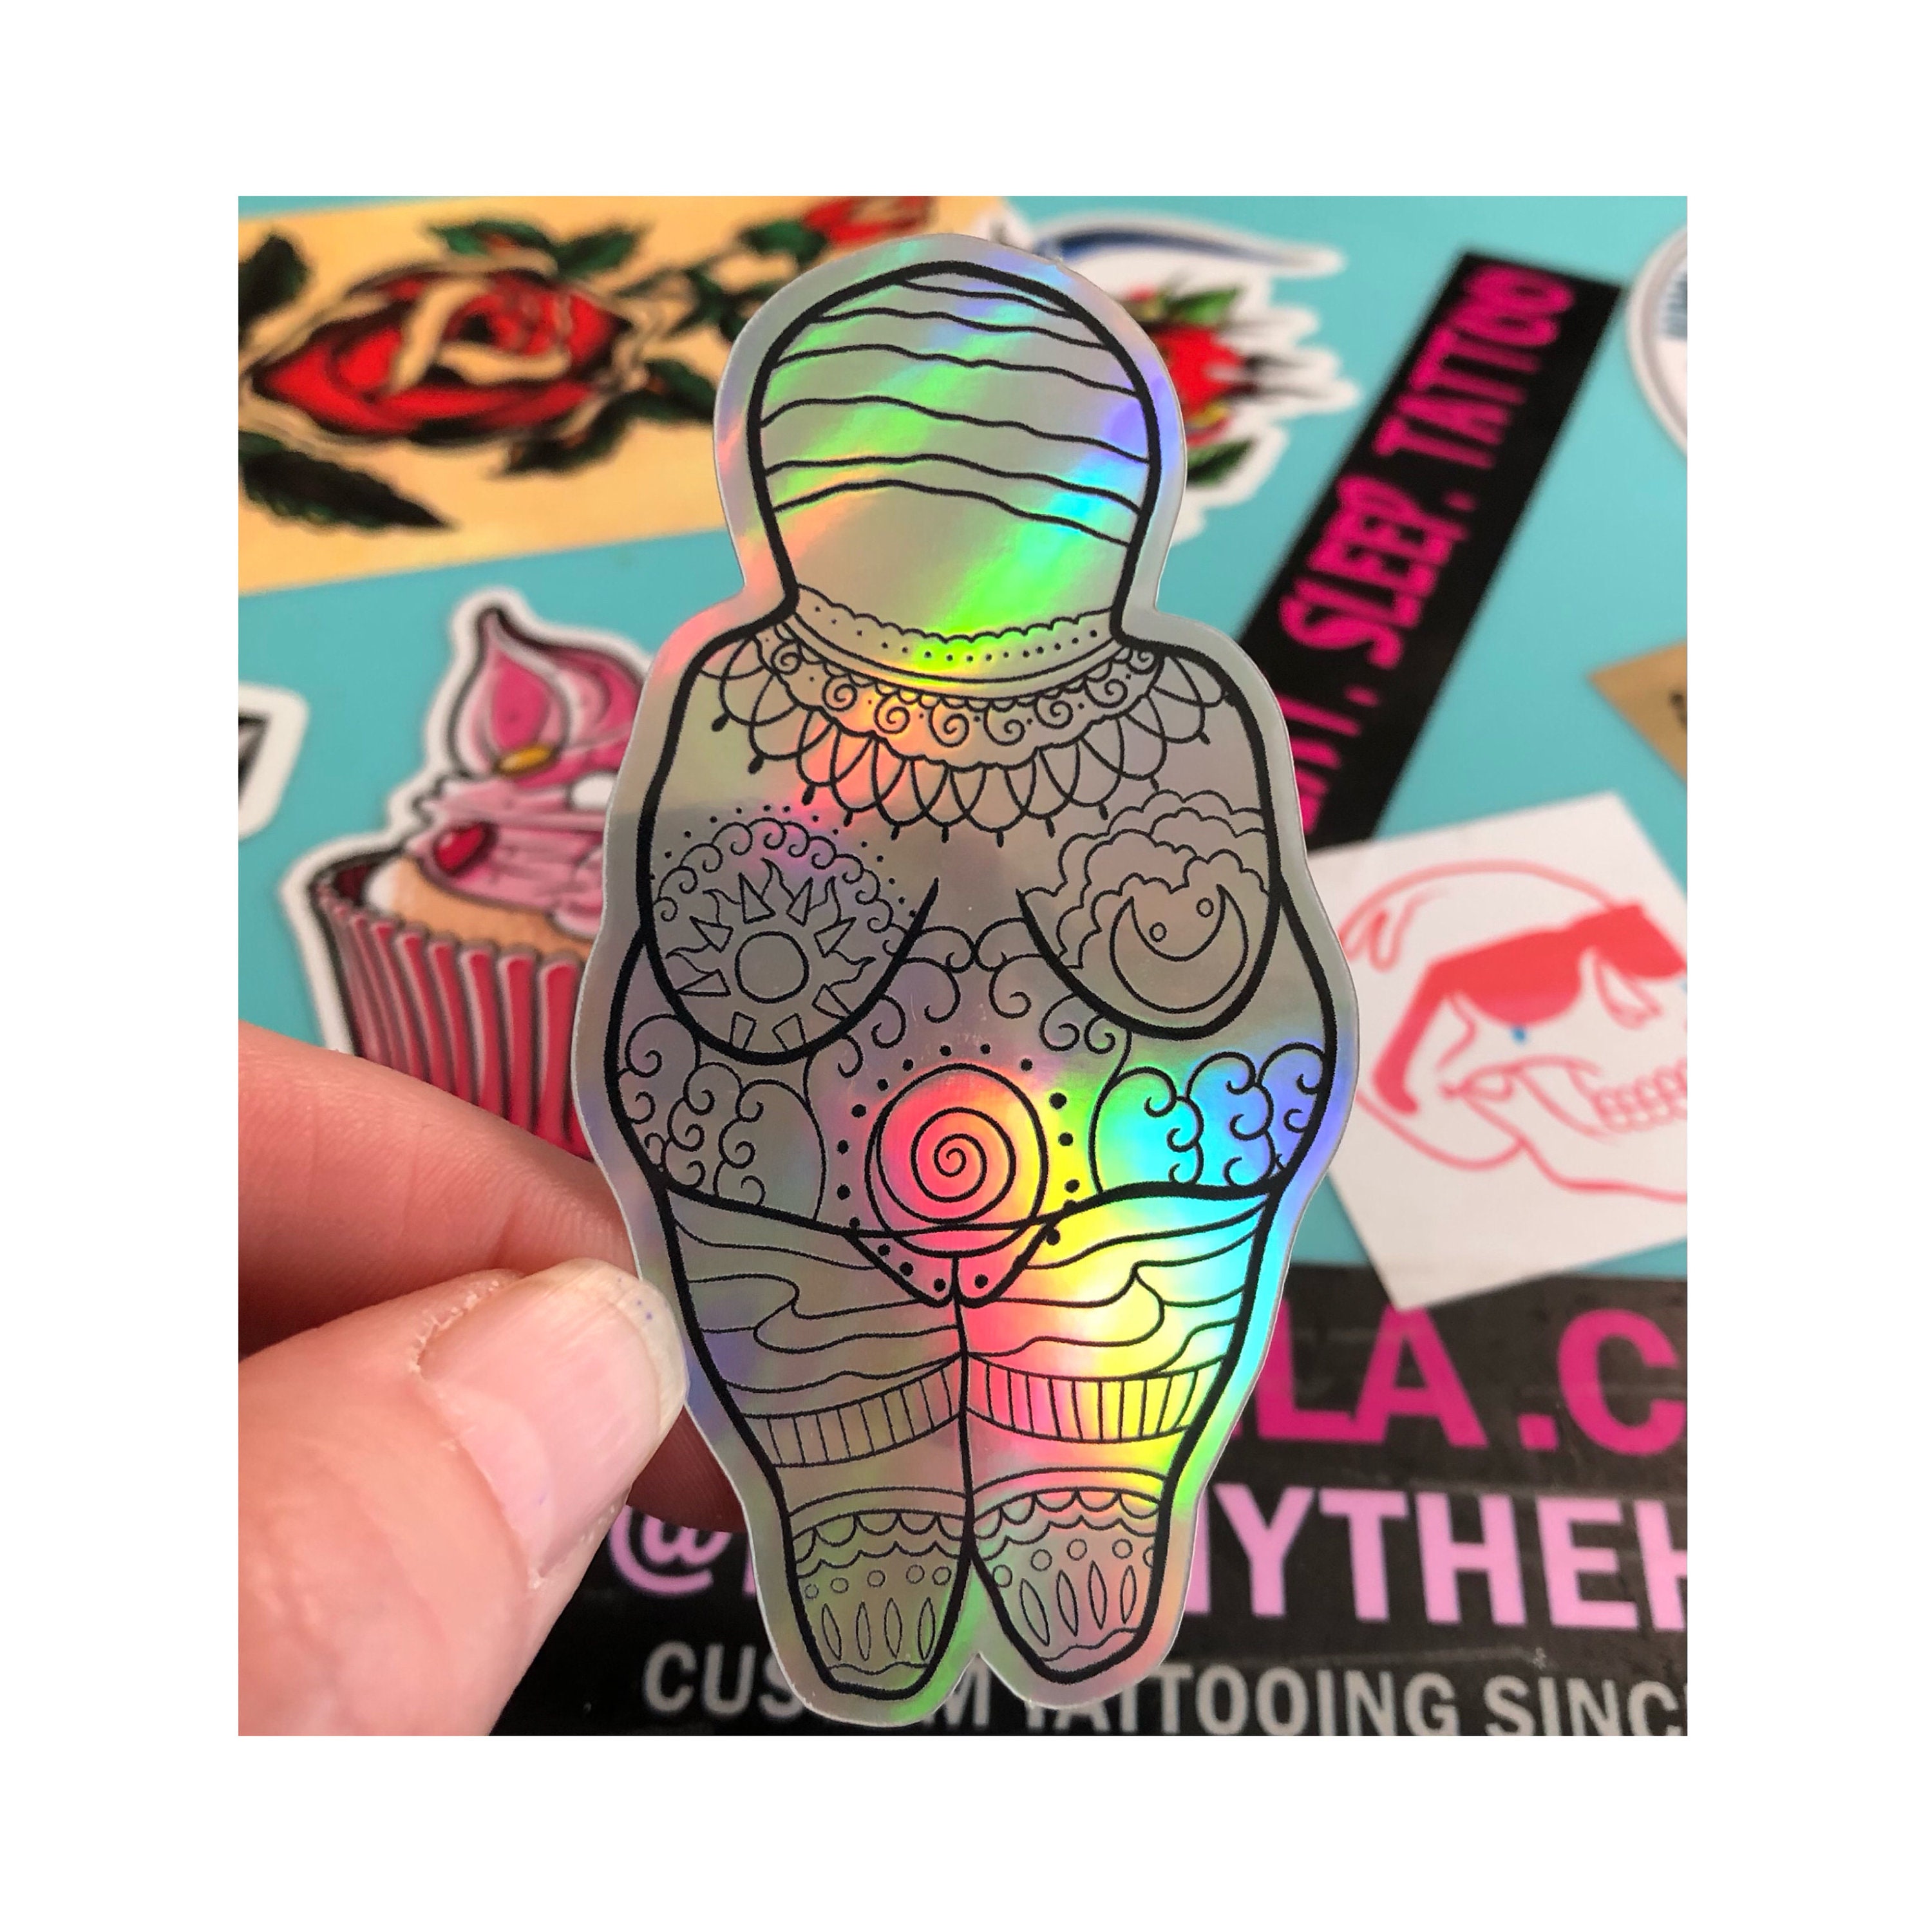 Holographic Venus Woman of Willendorf Sticker Laptop Decal - Etsy